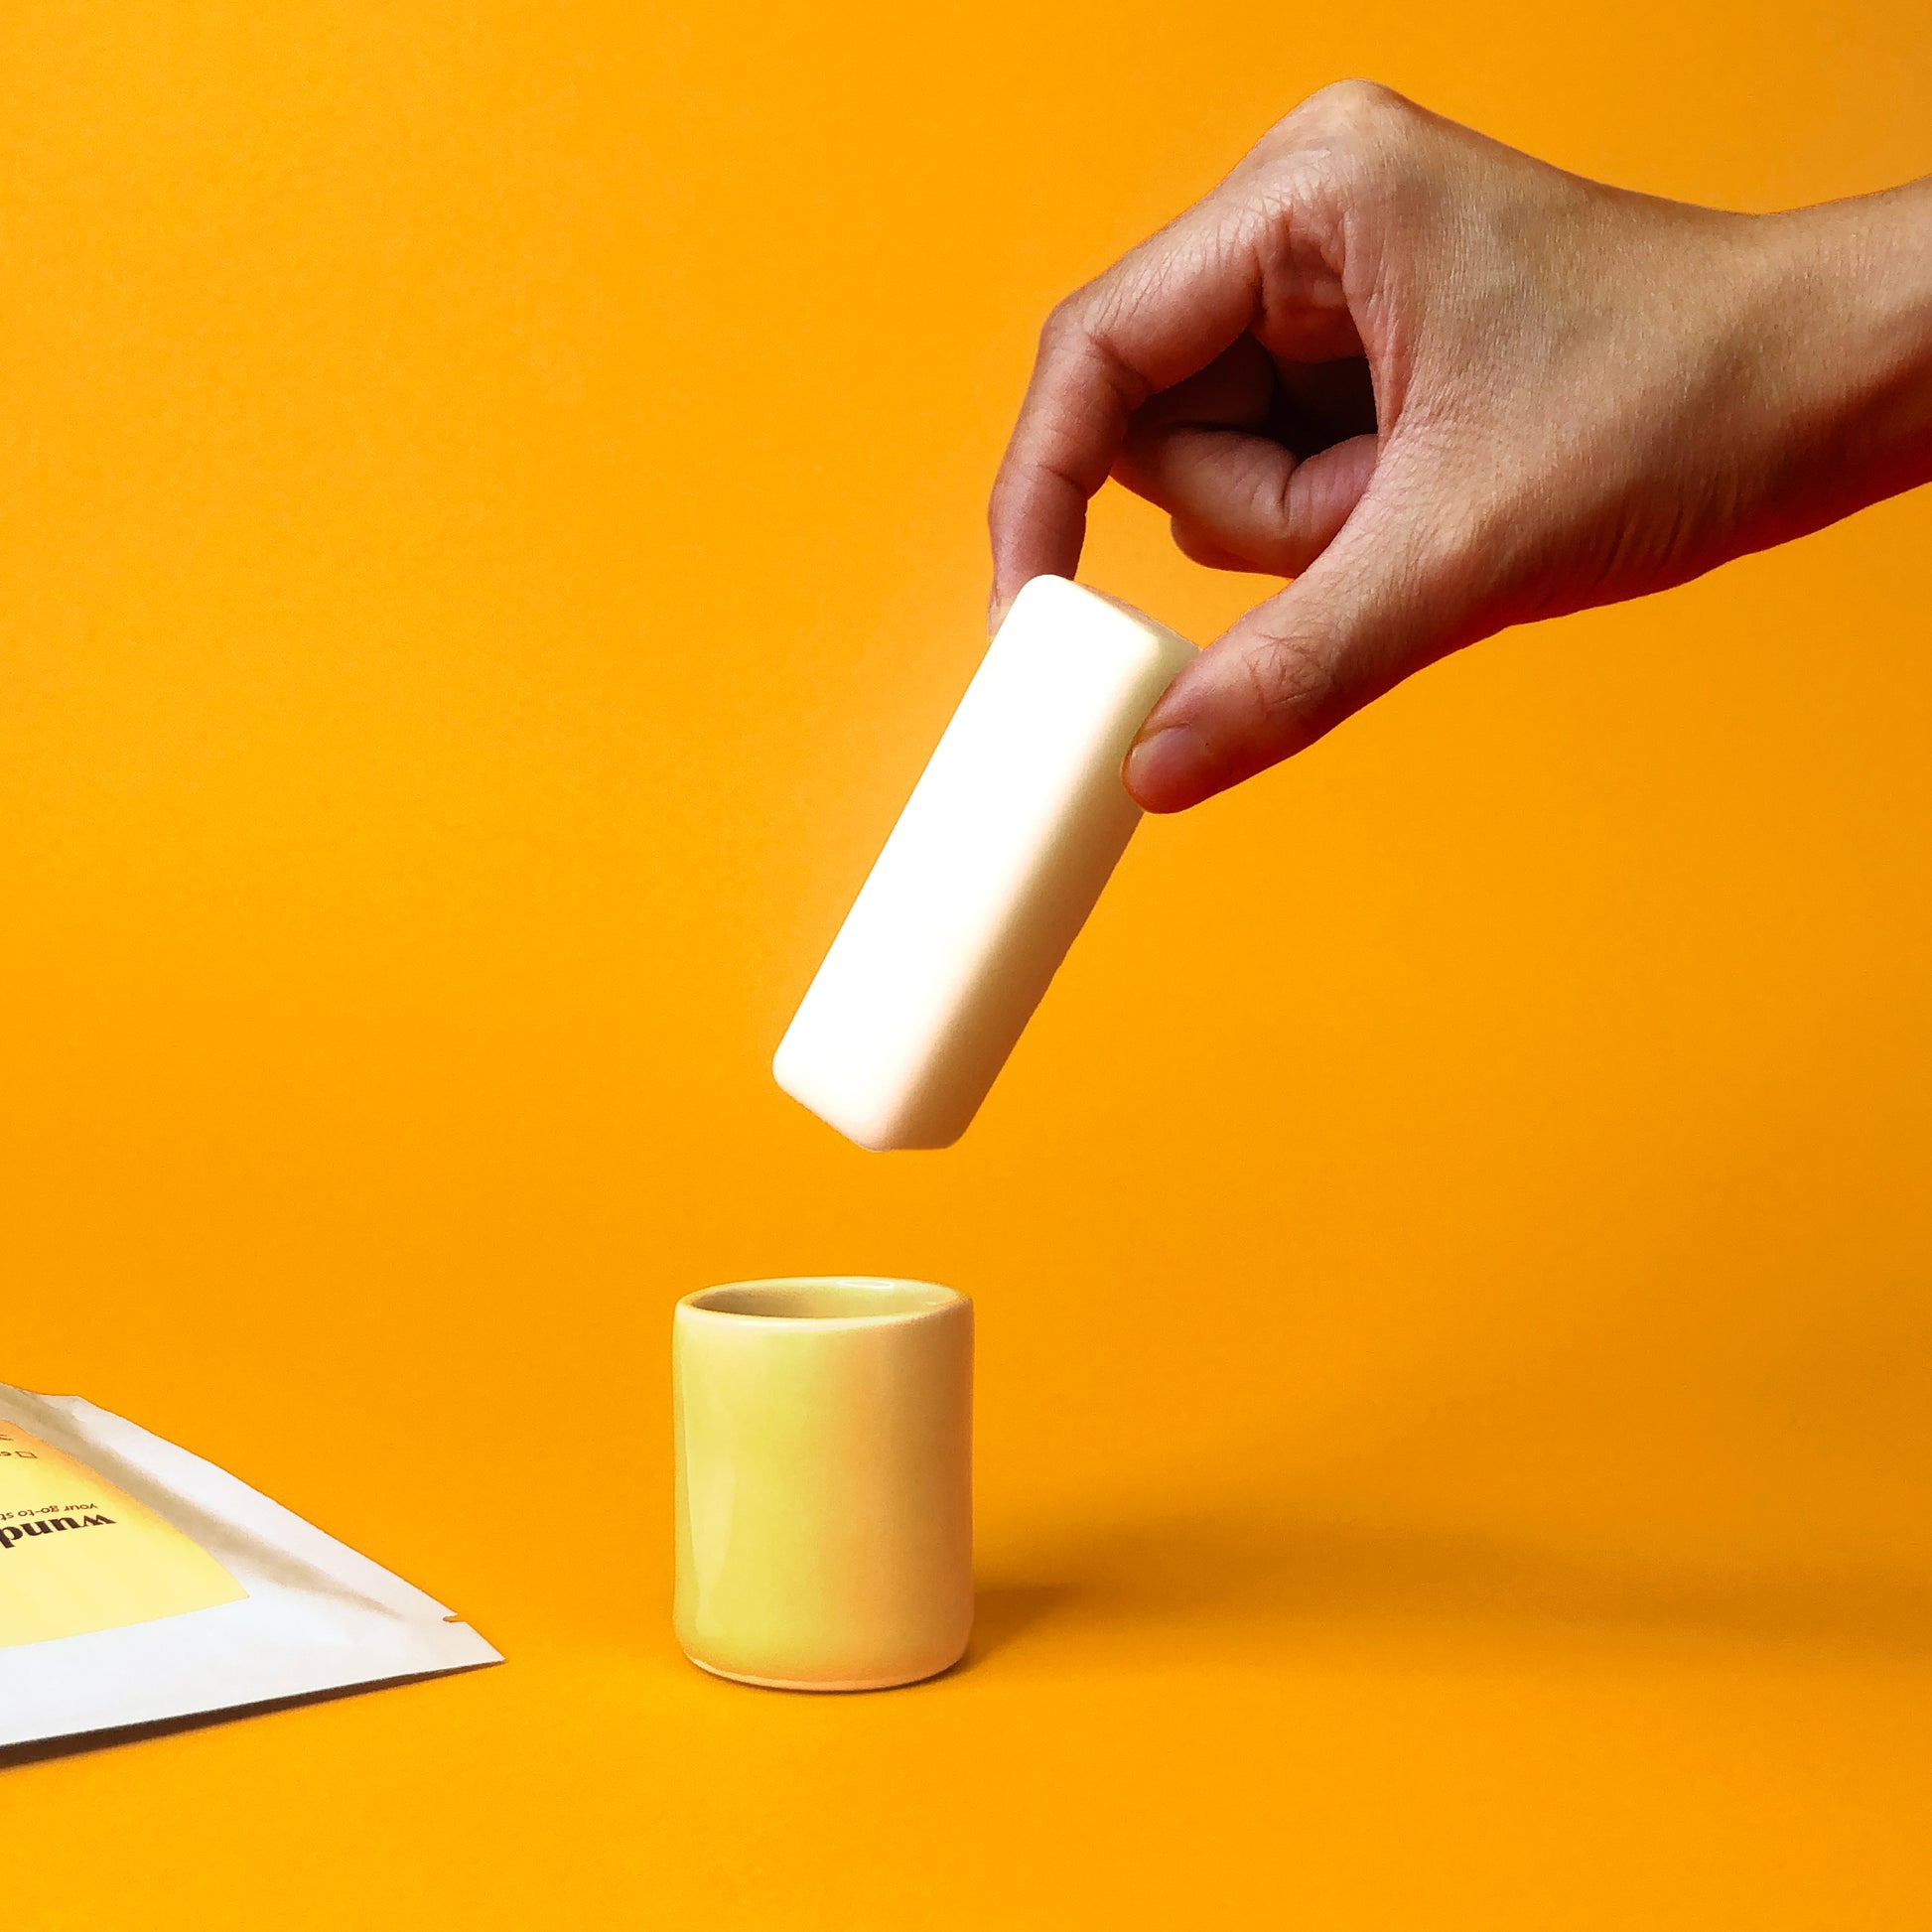 A hand places a stain removing soap stick into a yellow ceramic holder